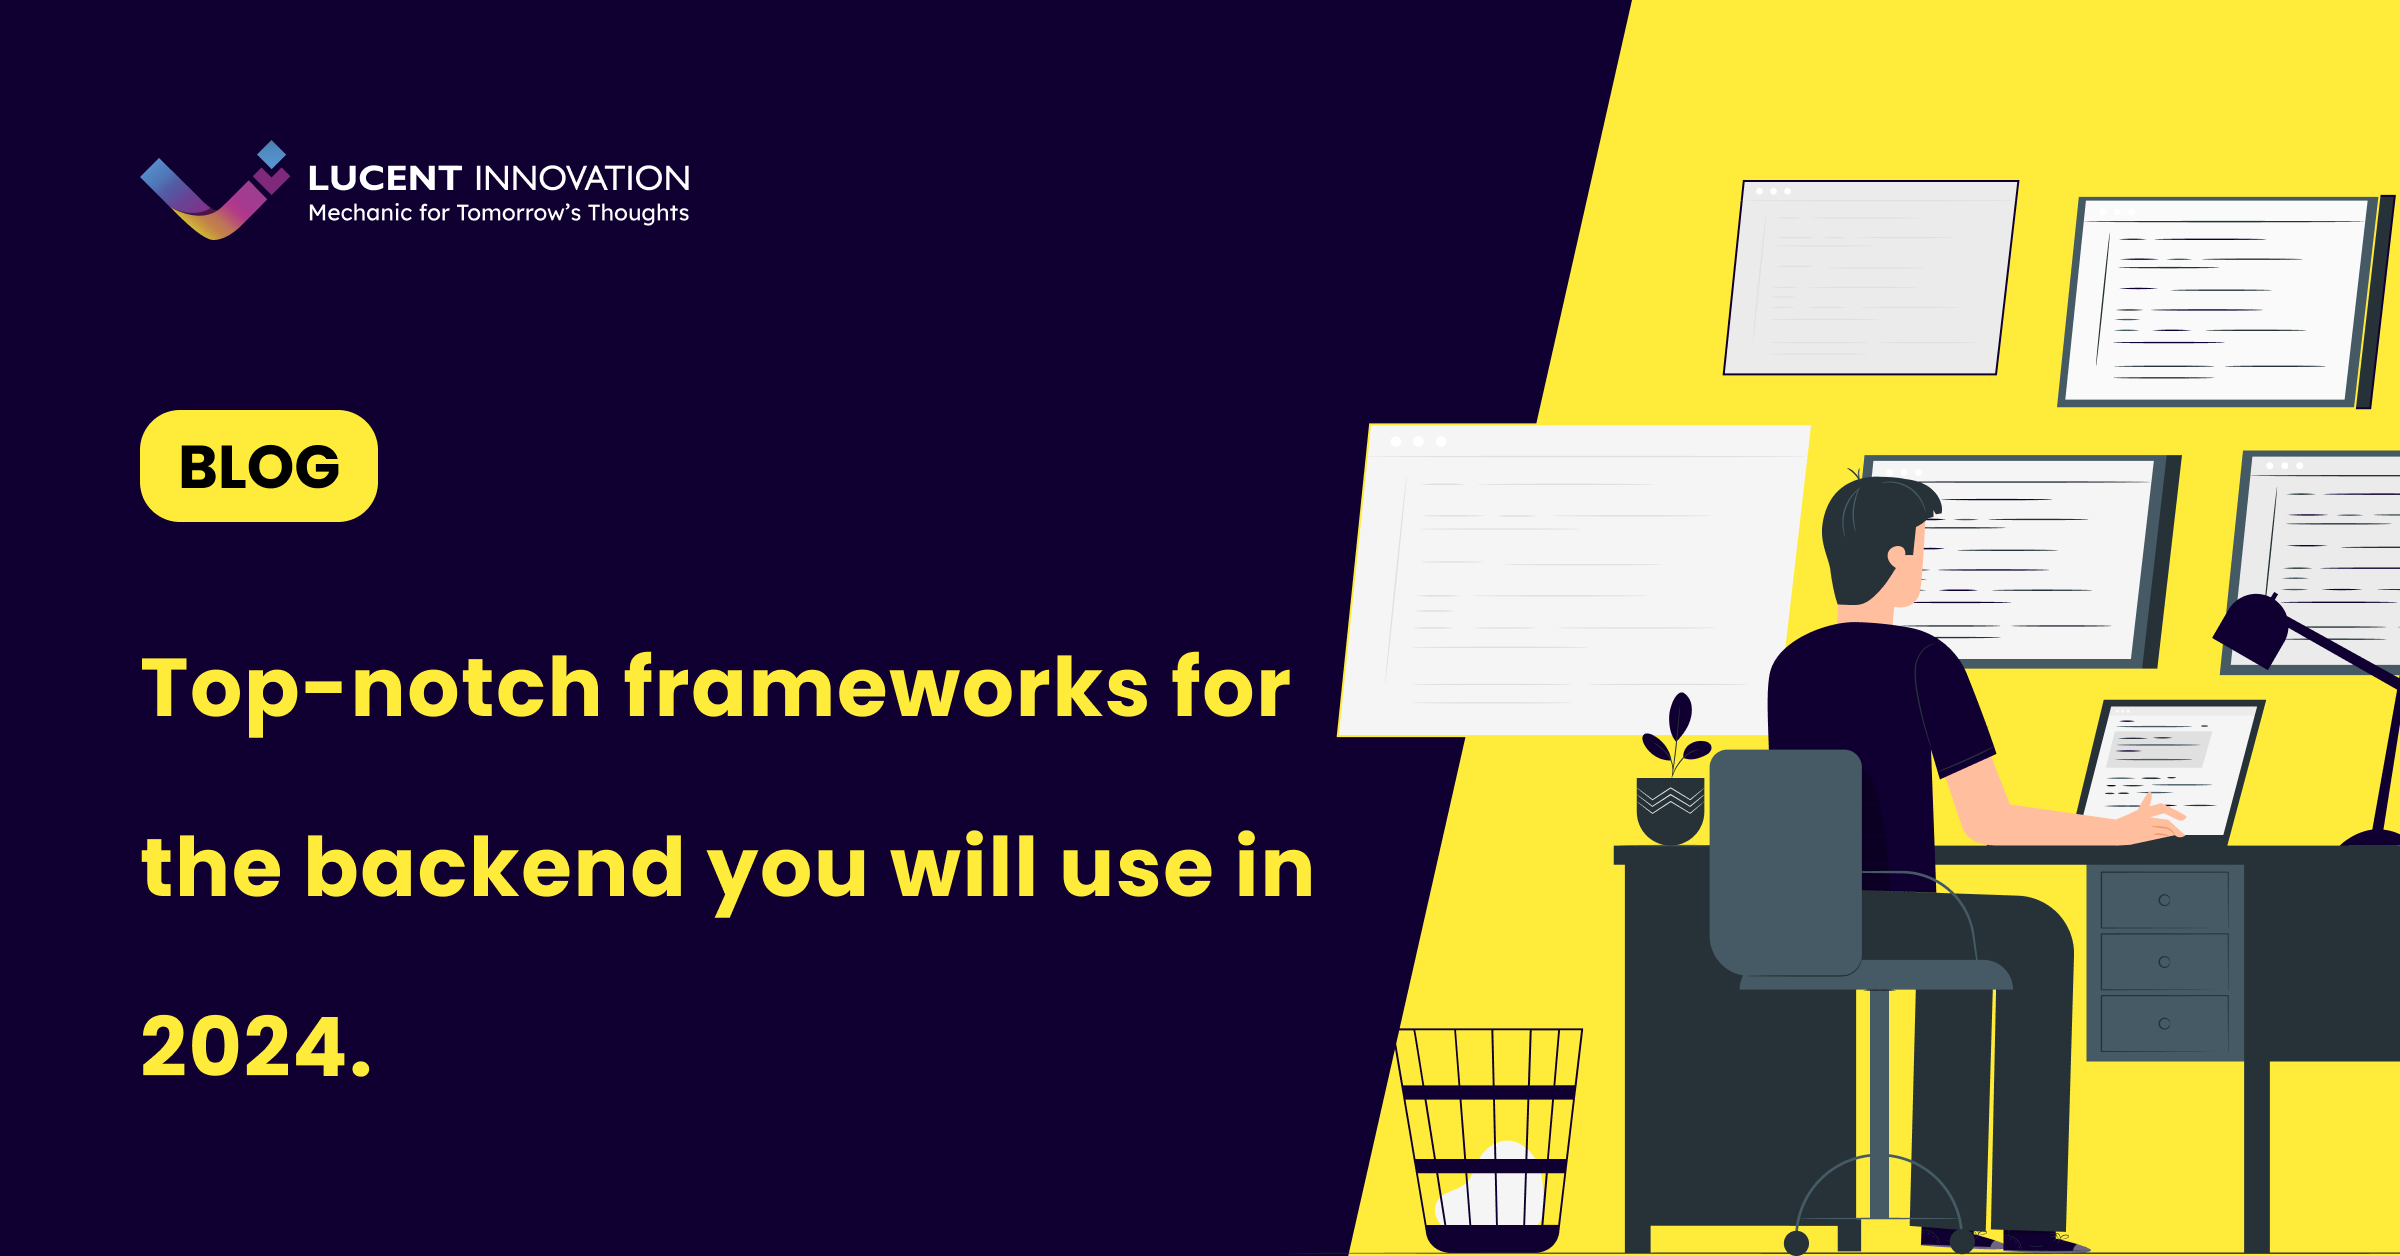 Top-notch frameworks for the backend you will use in 2024.